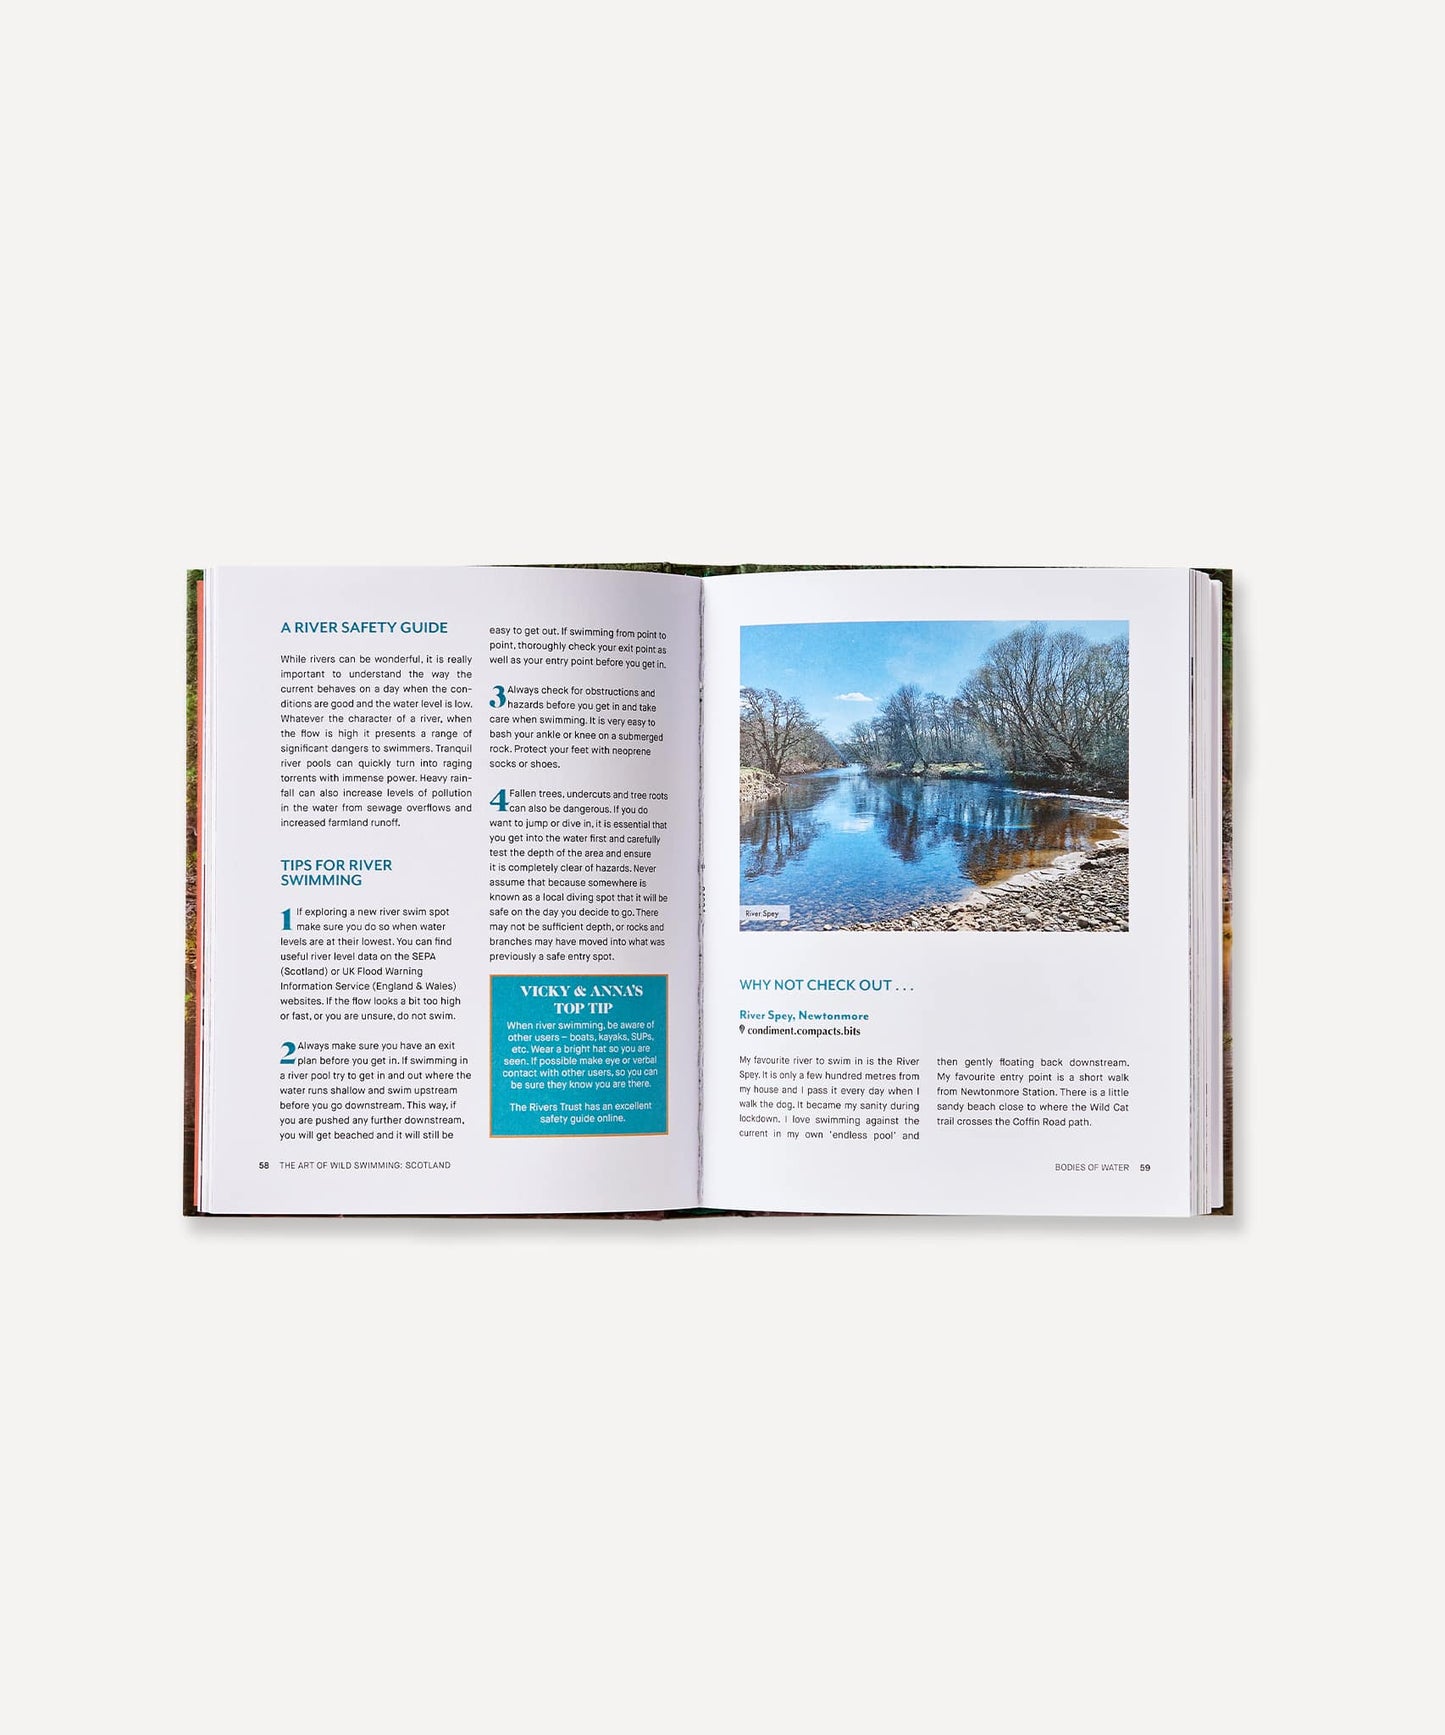 The Art Of Wild Swimming Scotland Book by Anna Deacon and Vicky Allan - Inside